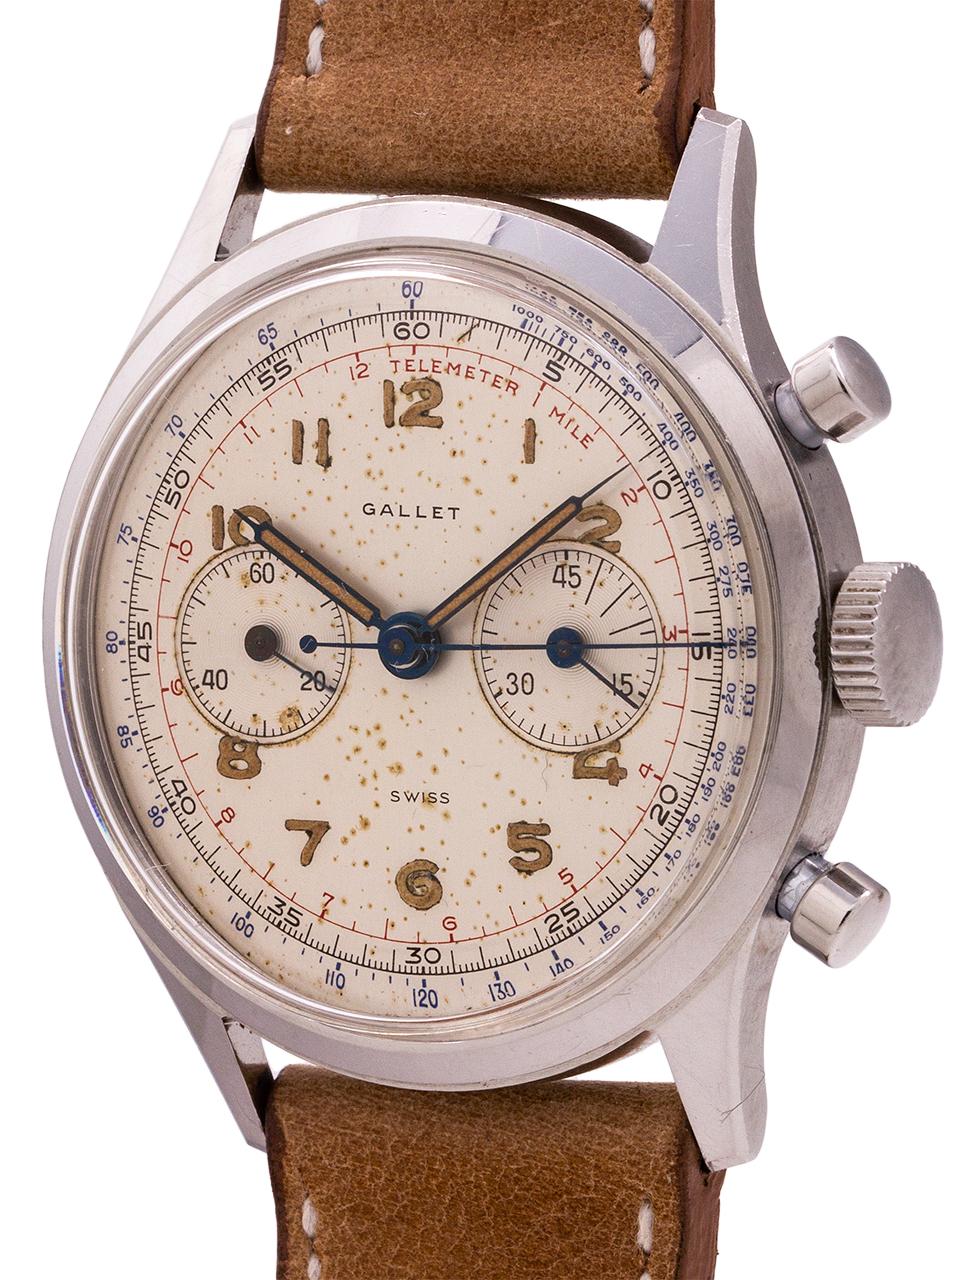 
Oversize vintage Gallet 2 registers manual wind chronograph circa 1950. Featuring a 37 x 44 stainless steel case with heavy compressor case back, round chronograph pushers, and with very pleasing original matte silvered dial with luminous arabic